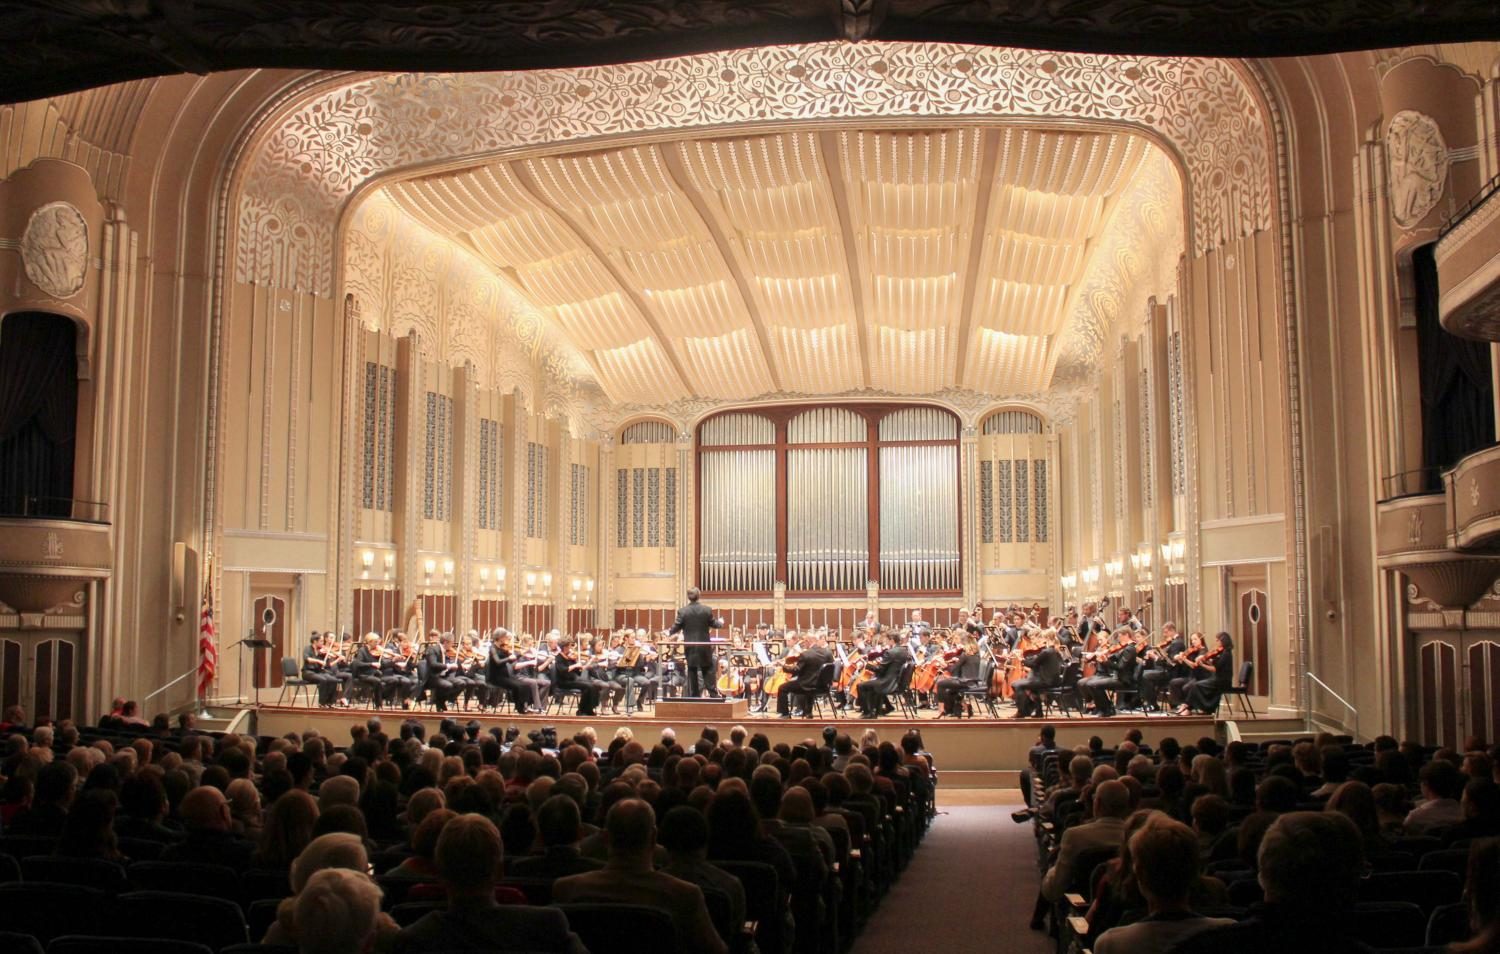 Oberlin Conservatory students and faculty members joined musicians from the Cleveland Orchestra, Cleveland Institute of Music, and Credo Music to play a benefit concert in Cleveland’s Severance Hall to raise funds for hurricane relief.